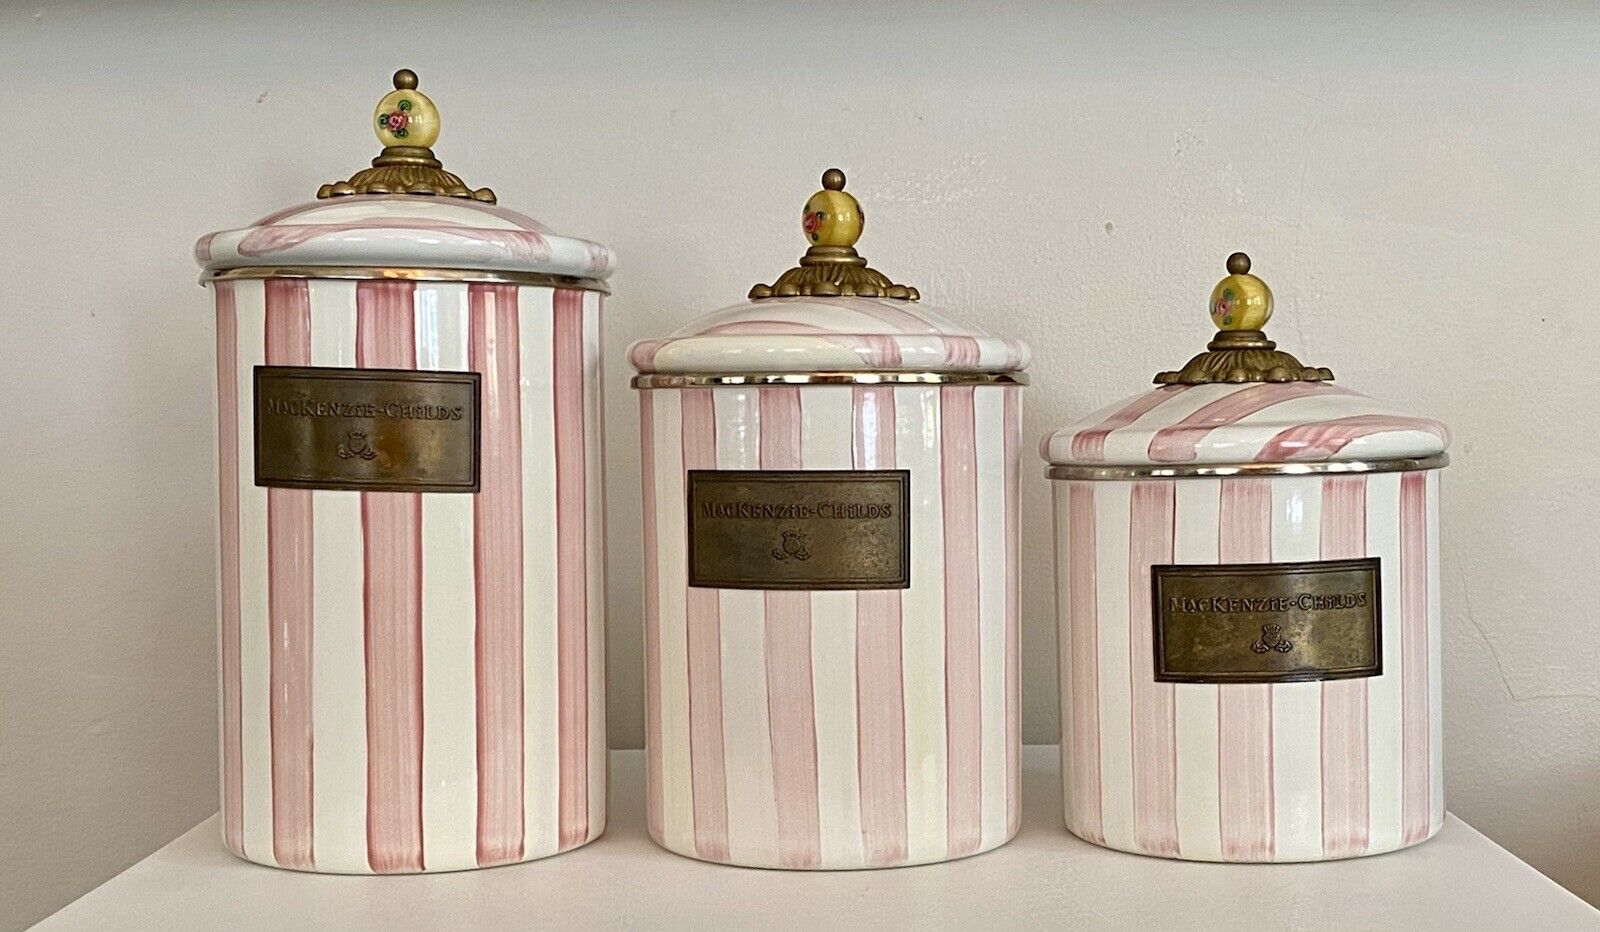 RARE Mackenzie Childs - Bathing Hut 3 piece Canister set, pink and white stripe 